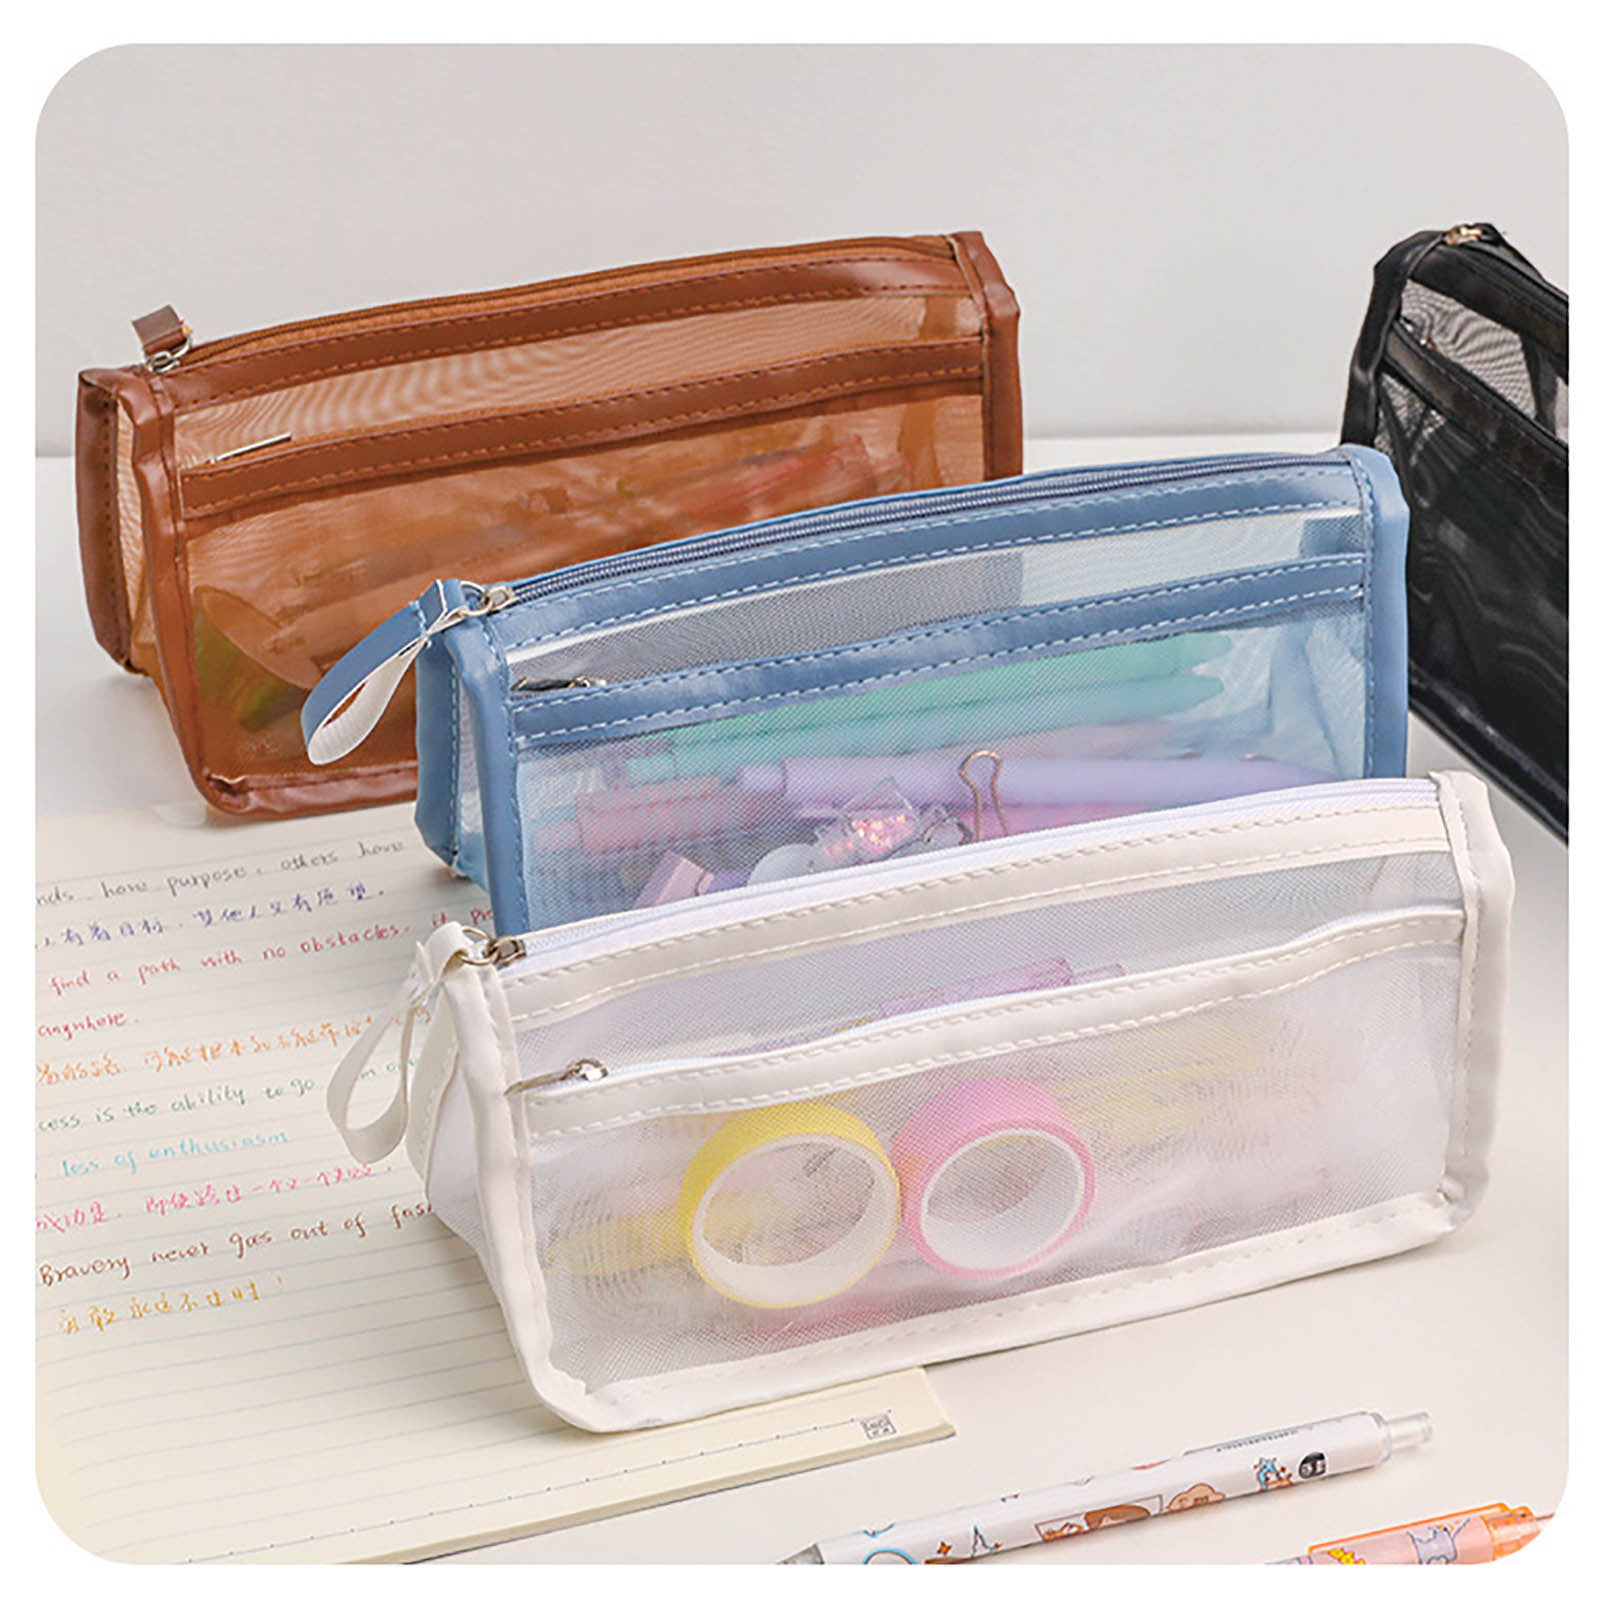 Realhomelove Grid Mesh Pencil Case with Zipper, Transparent Thin Pencil  Pouch Big Capacity Clear Makeup Bag Multi-Purpose Organizer Box for School